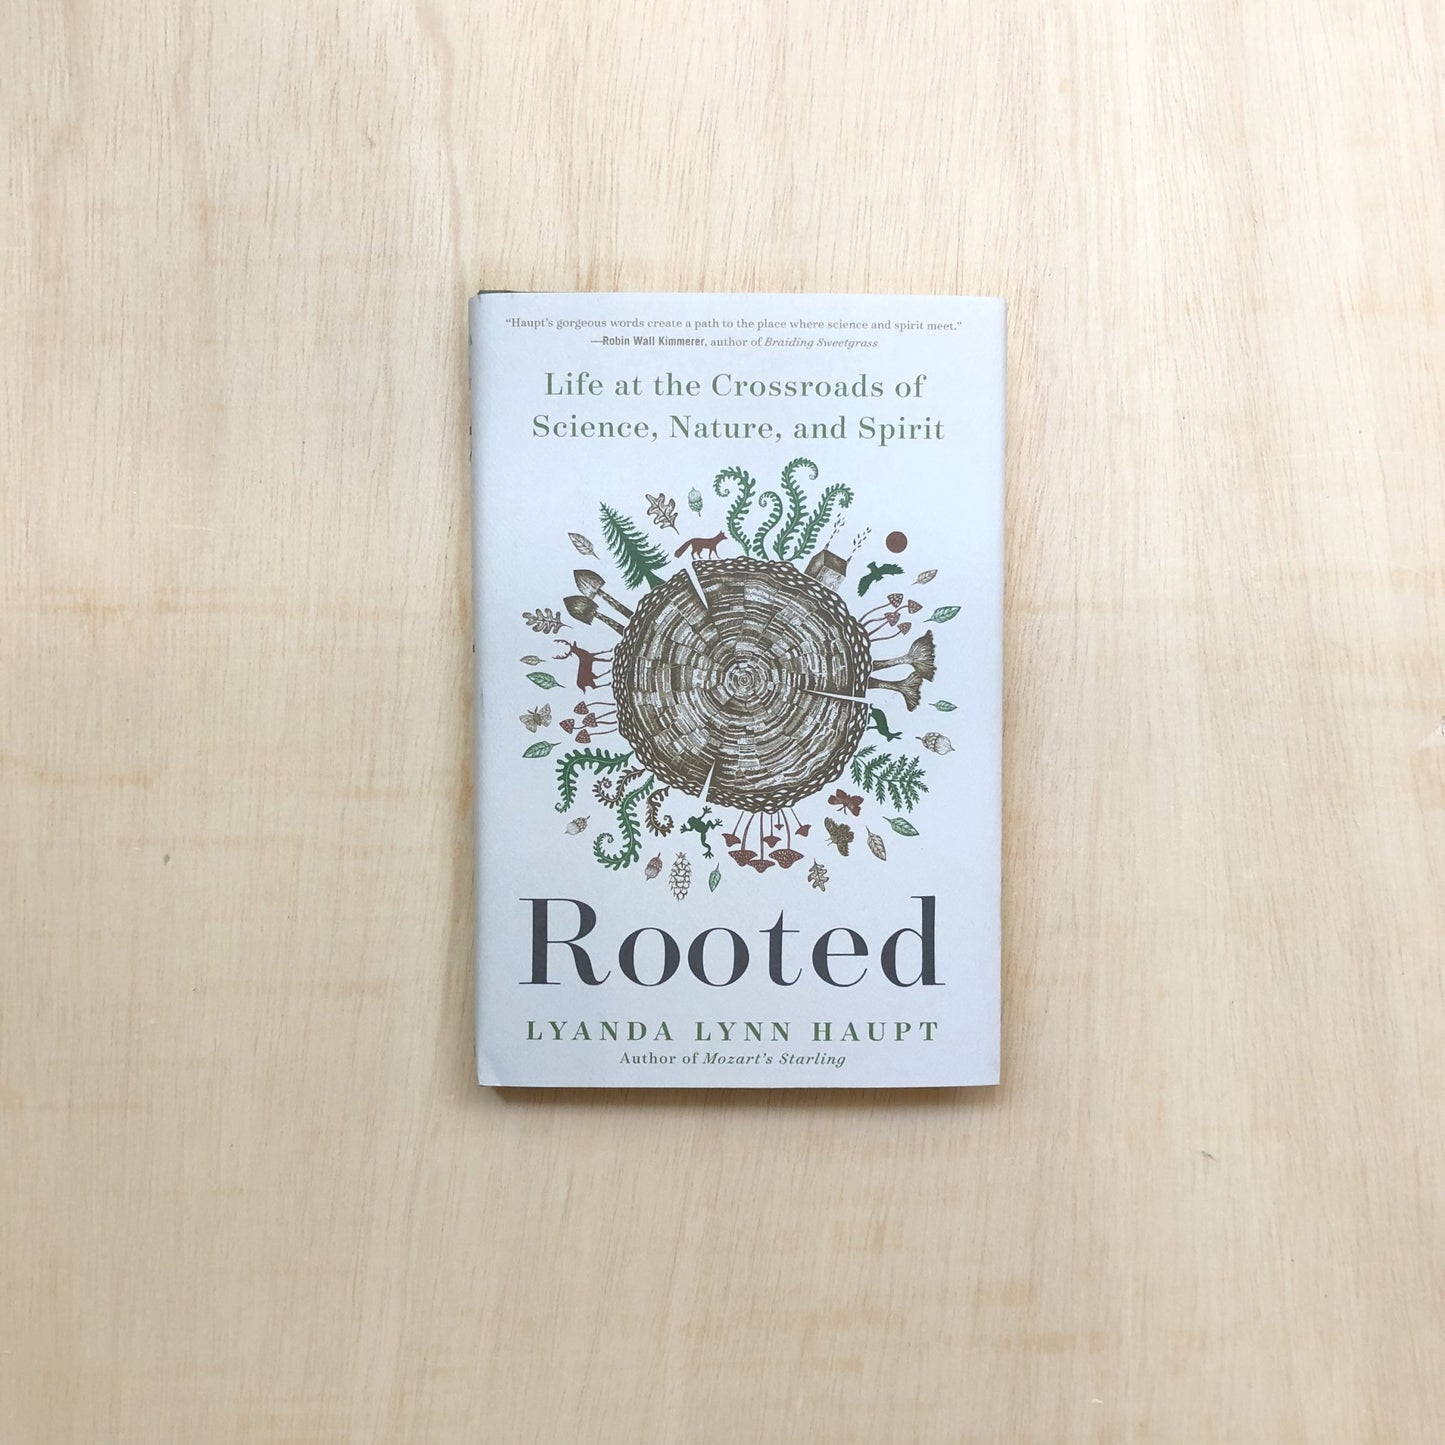 Rooted - Life at the Crossroads of Science, Nature, and Spirit